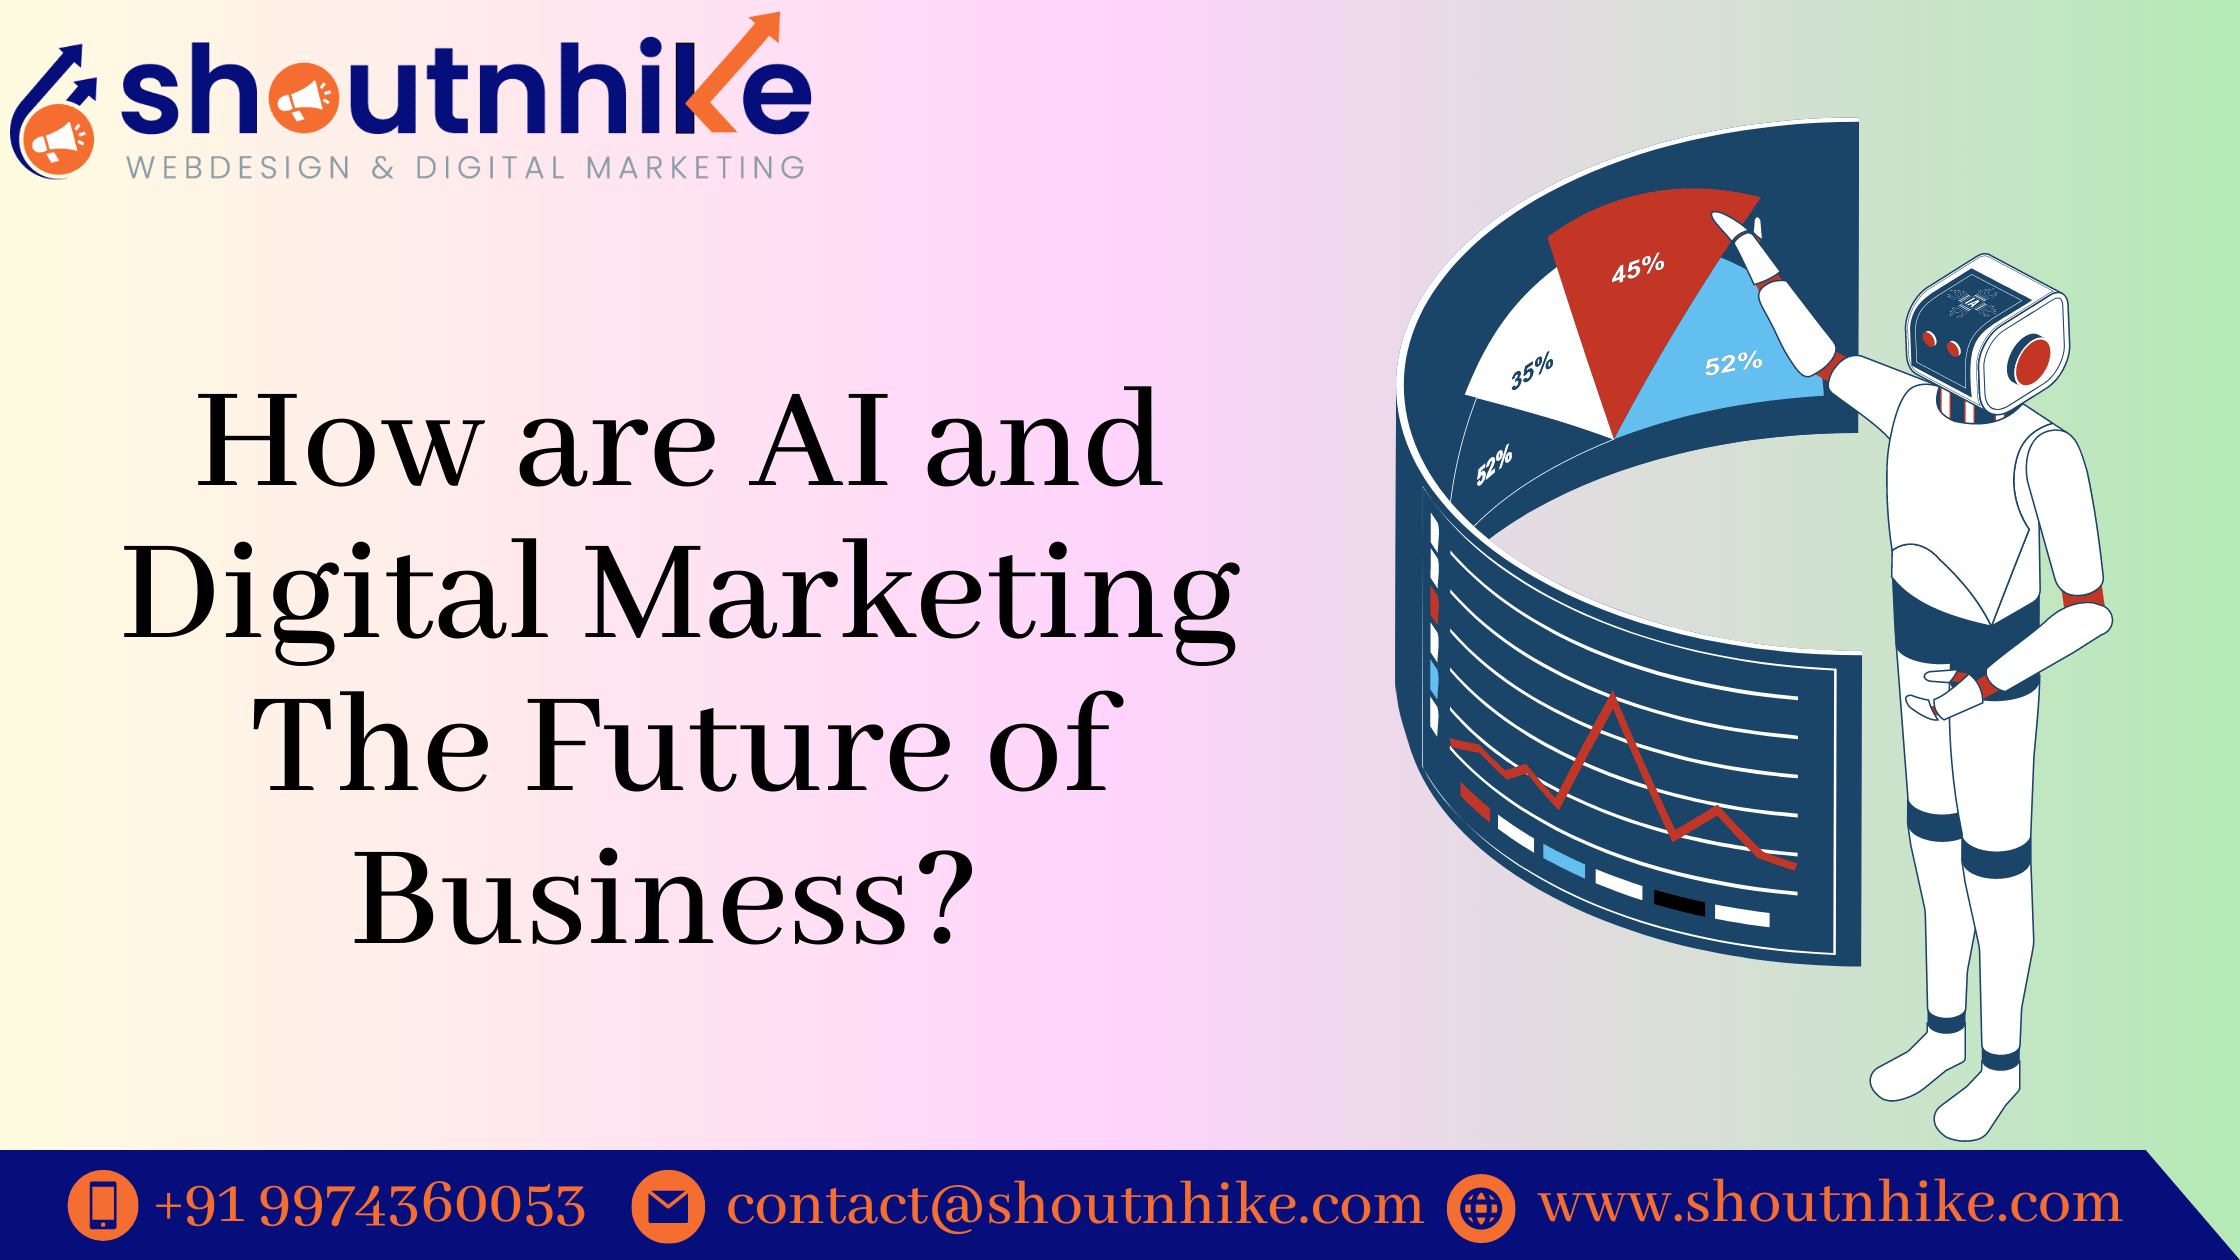 How are AI and Digital Marketing The Future of Business?